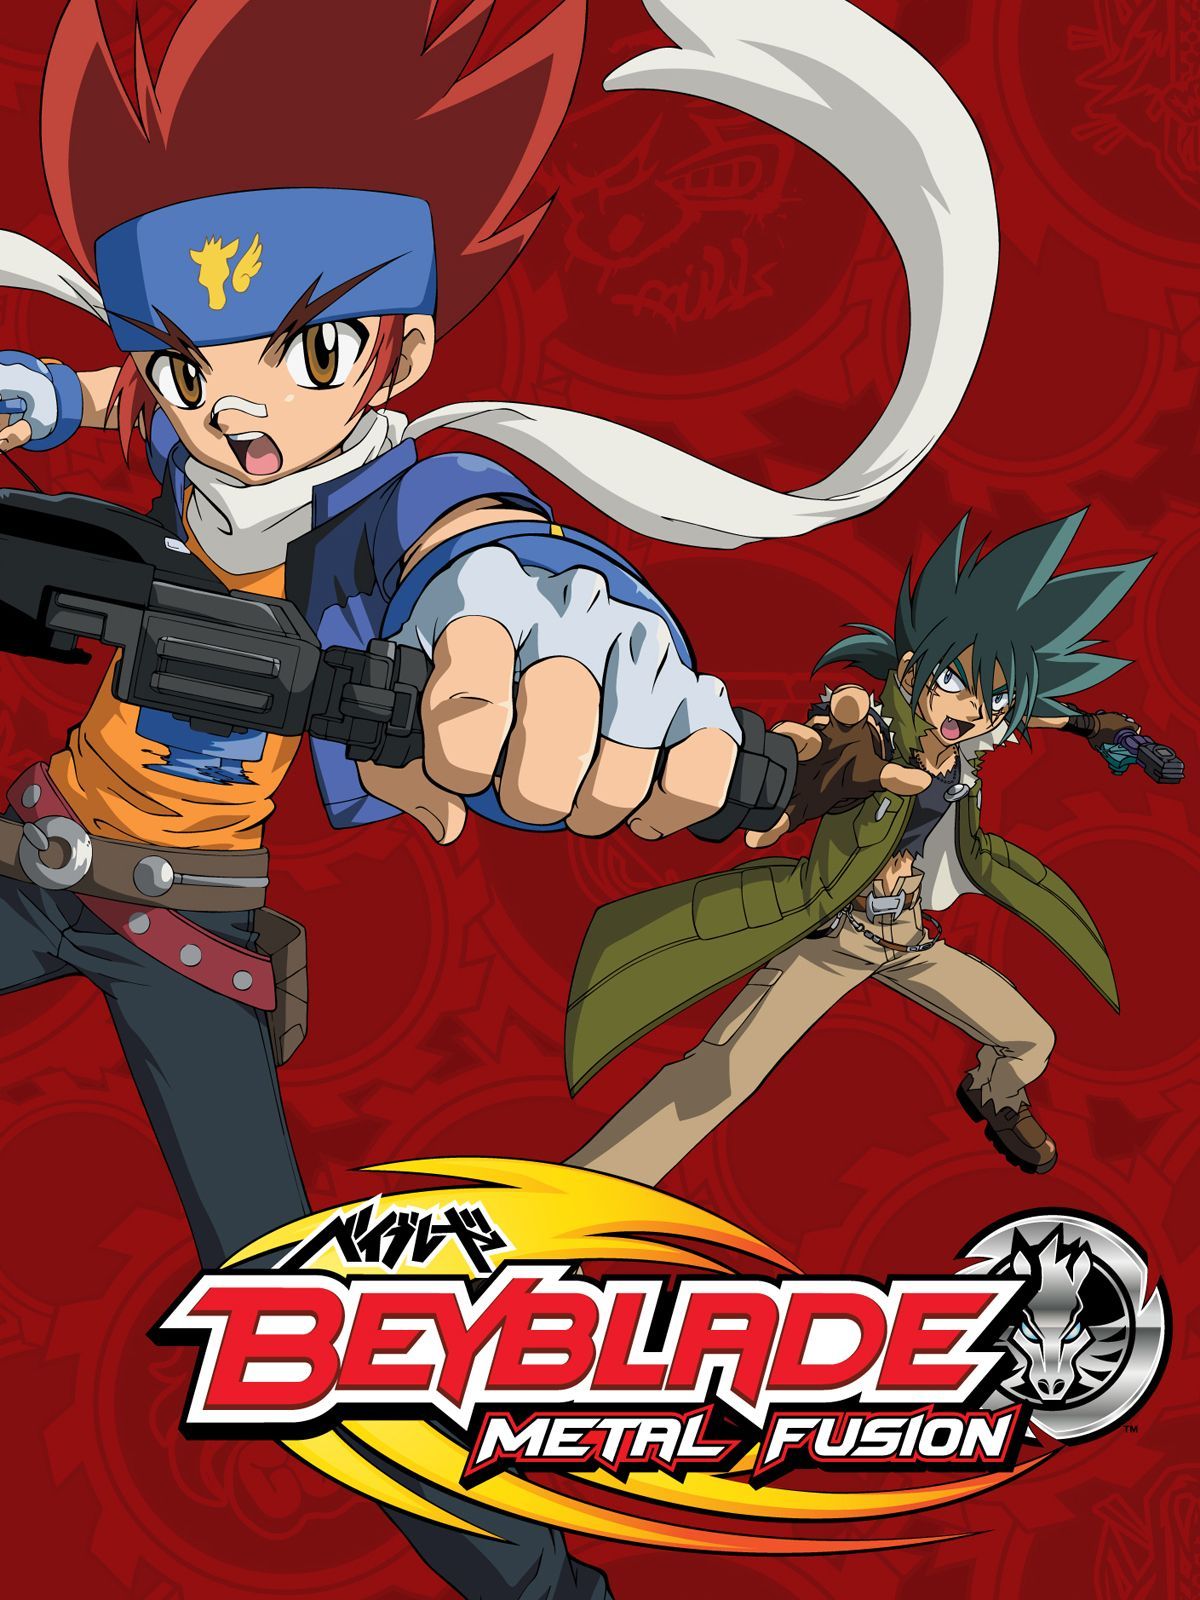 download subtitles indonesia beyblade metal fight